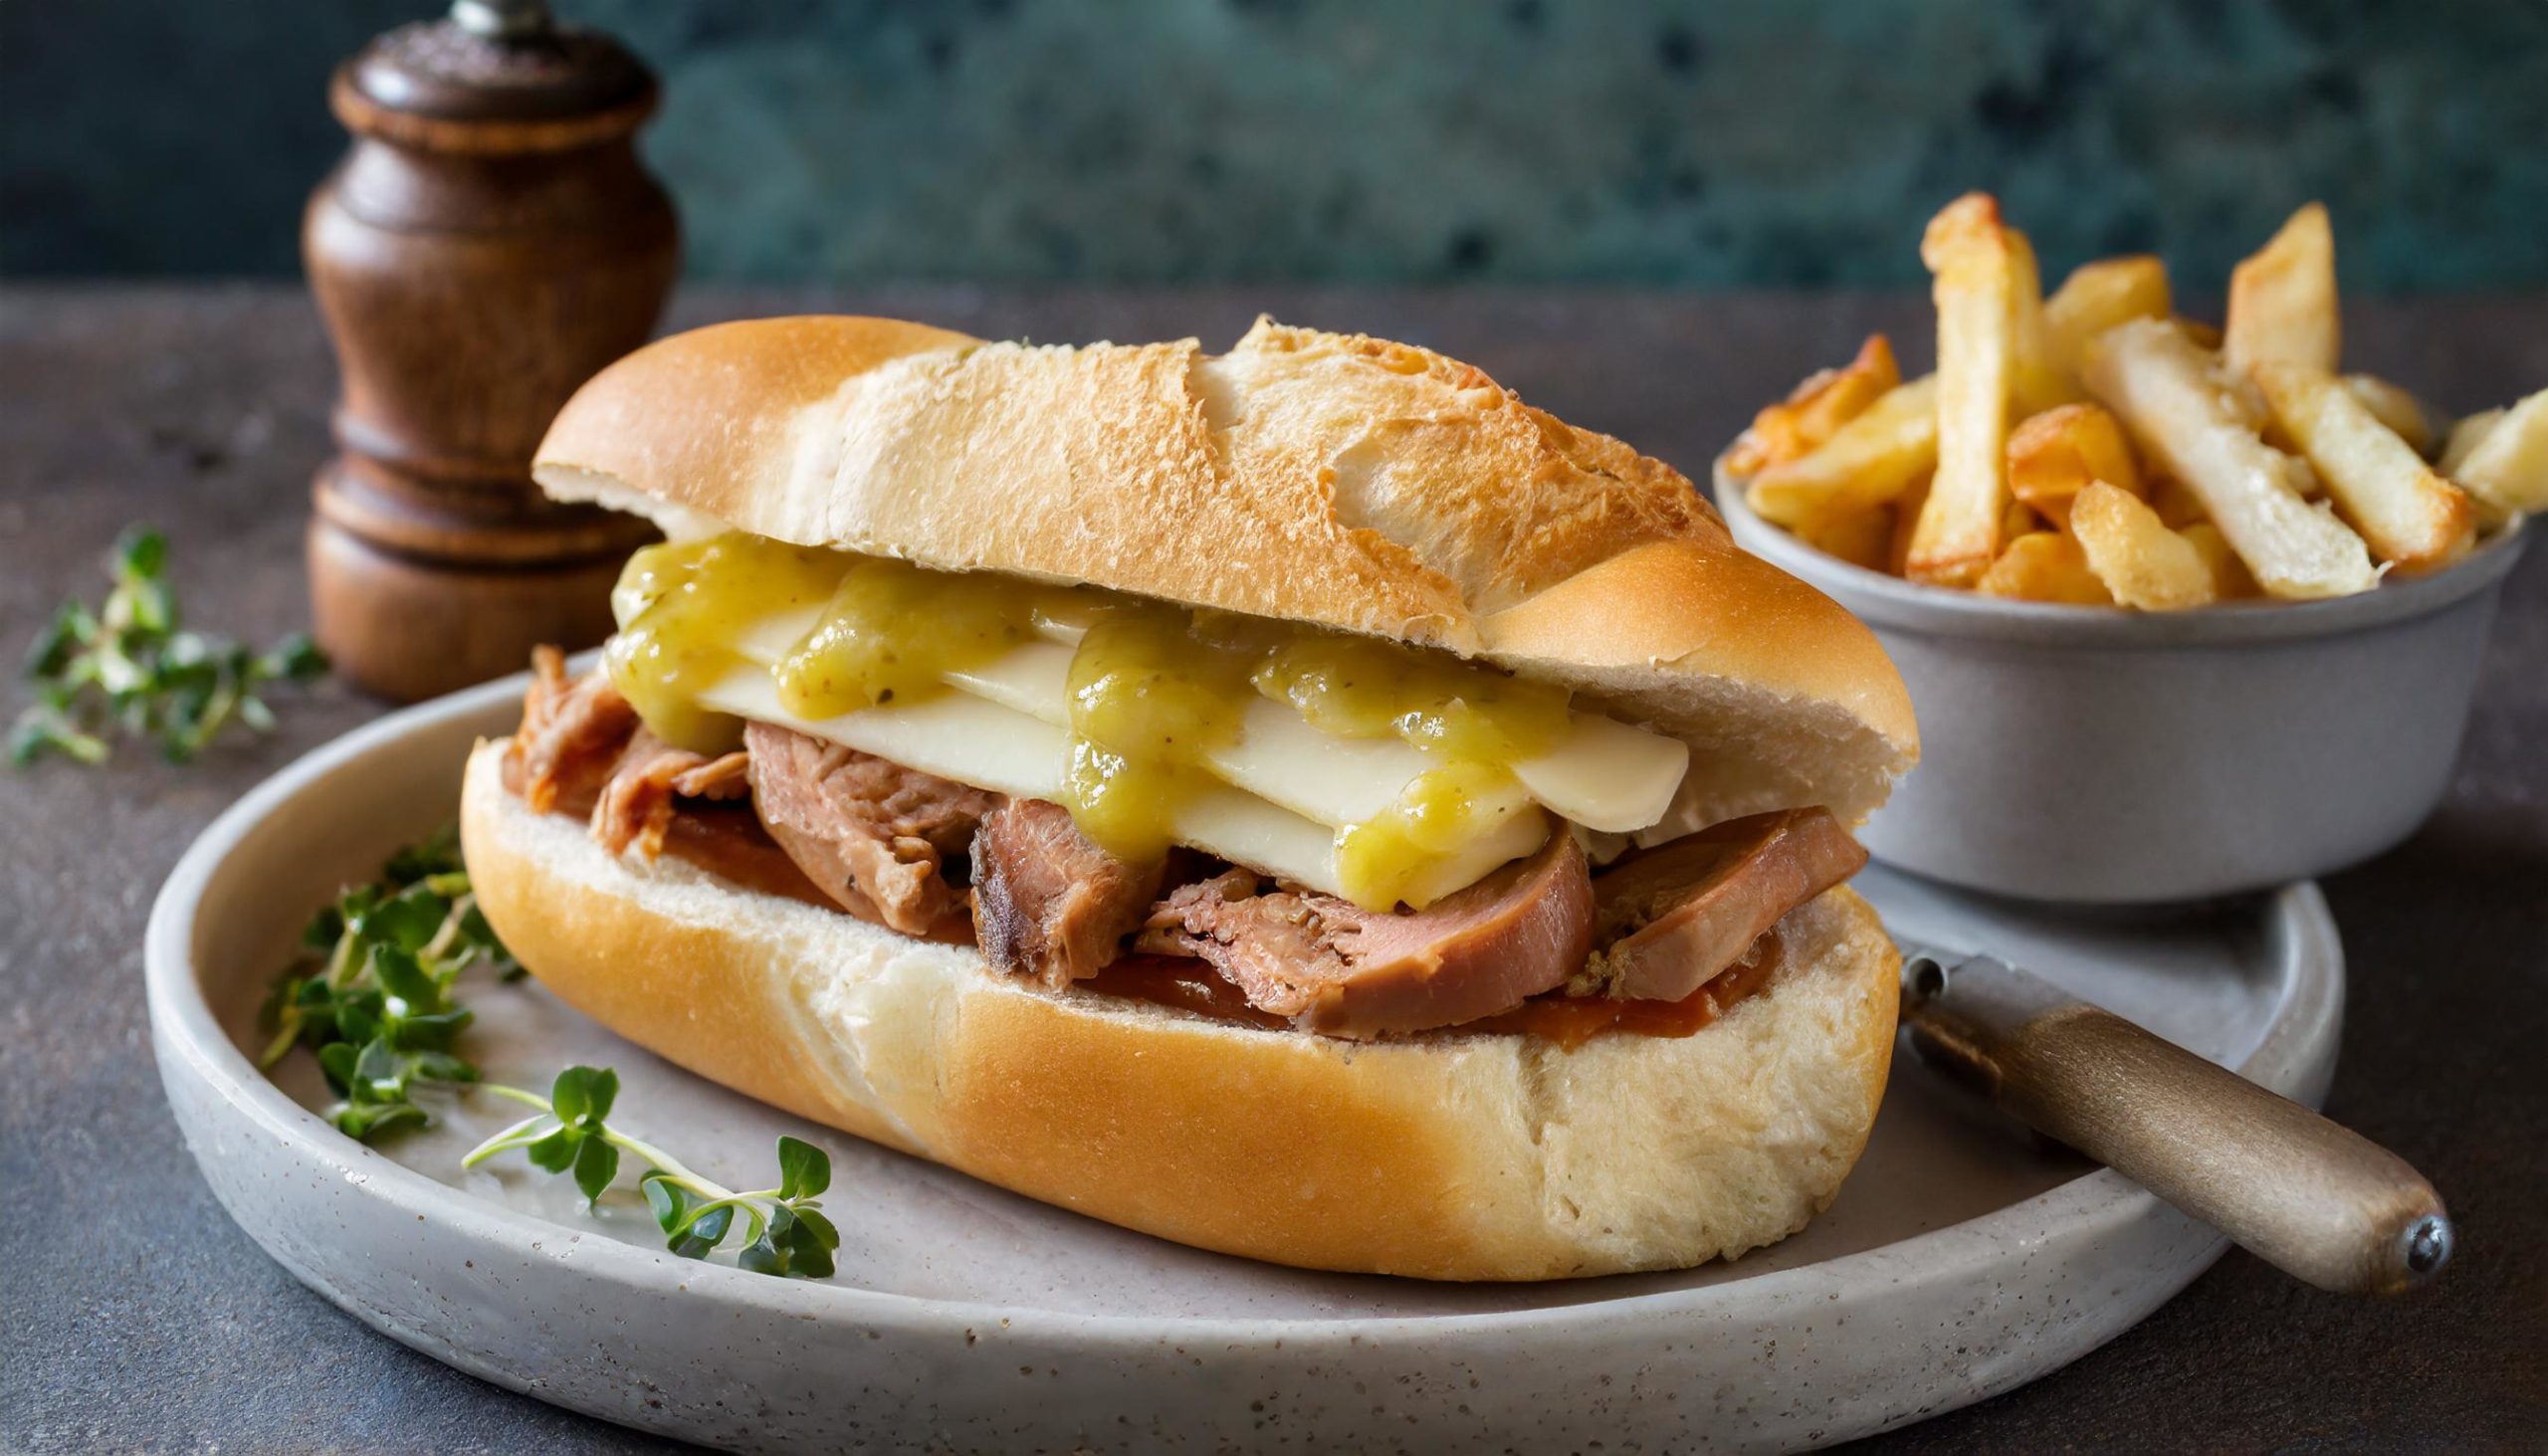 Easy French dip sandwiches